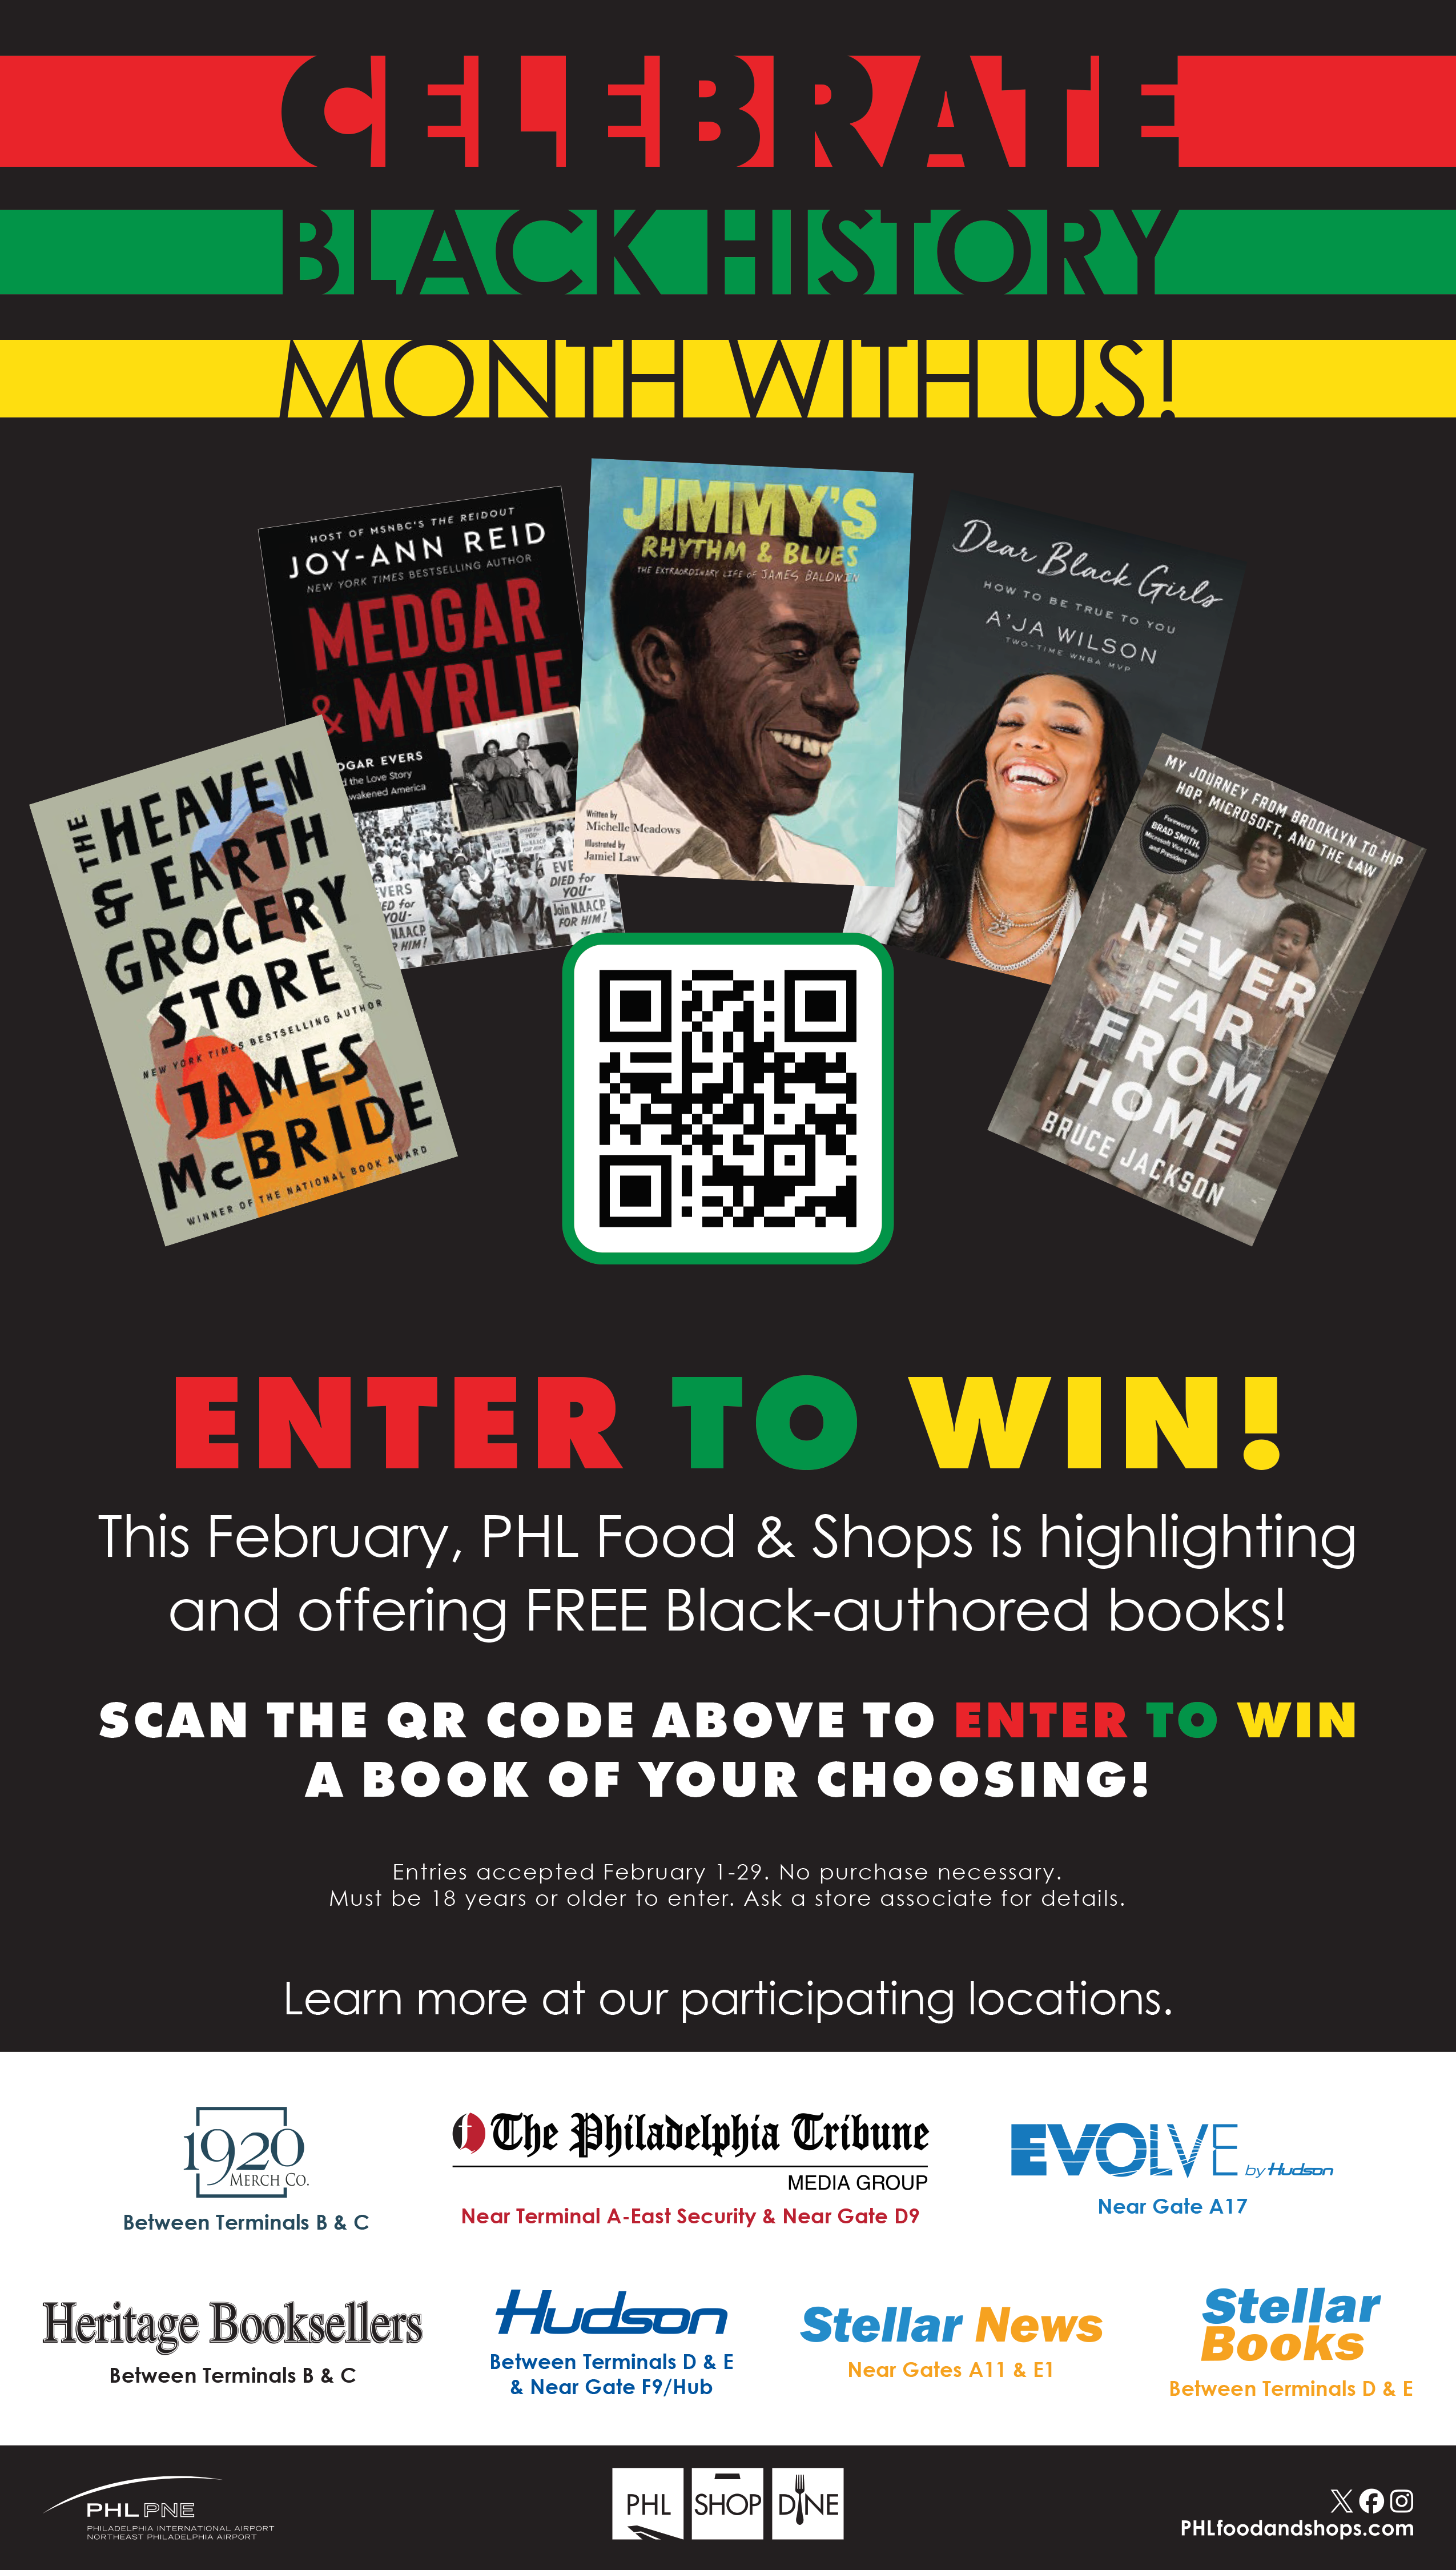 Scan to win a book